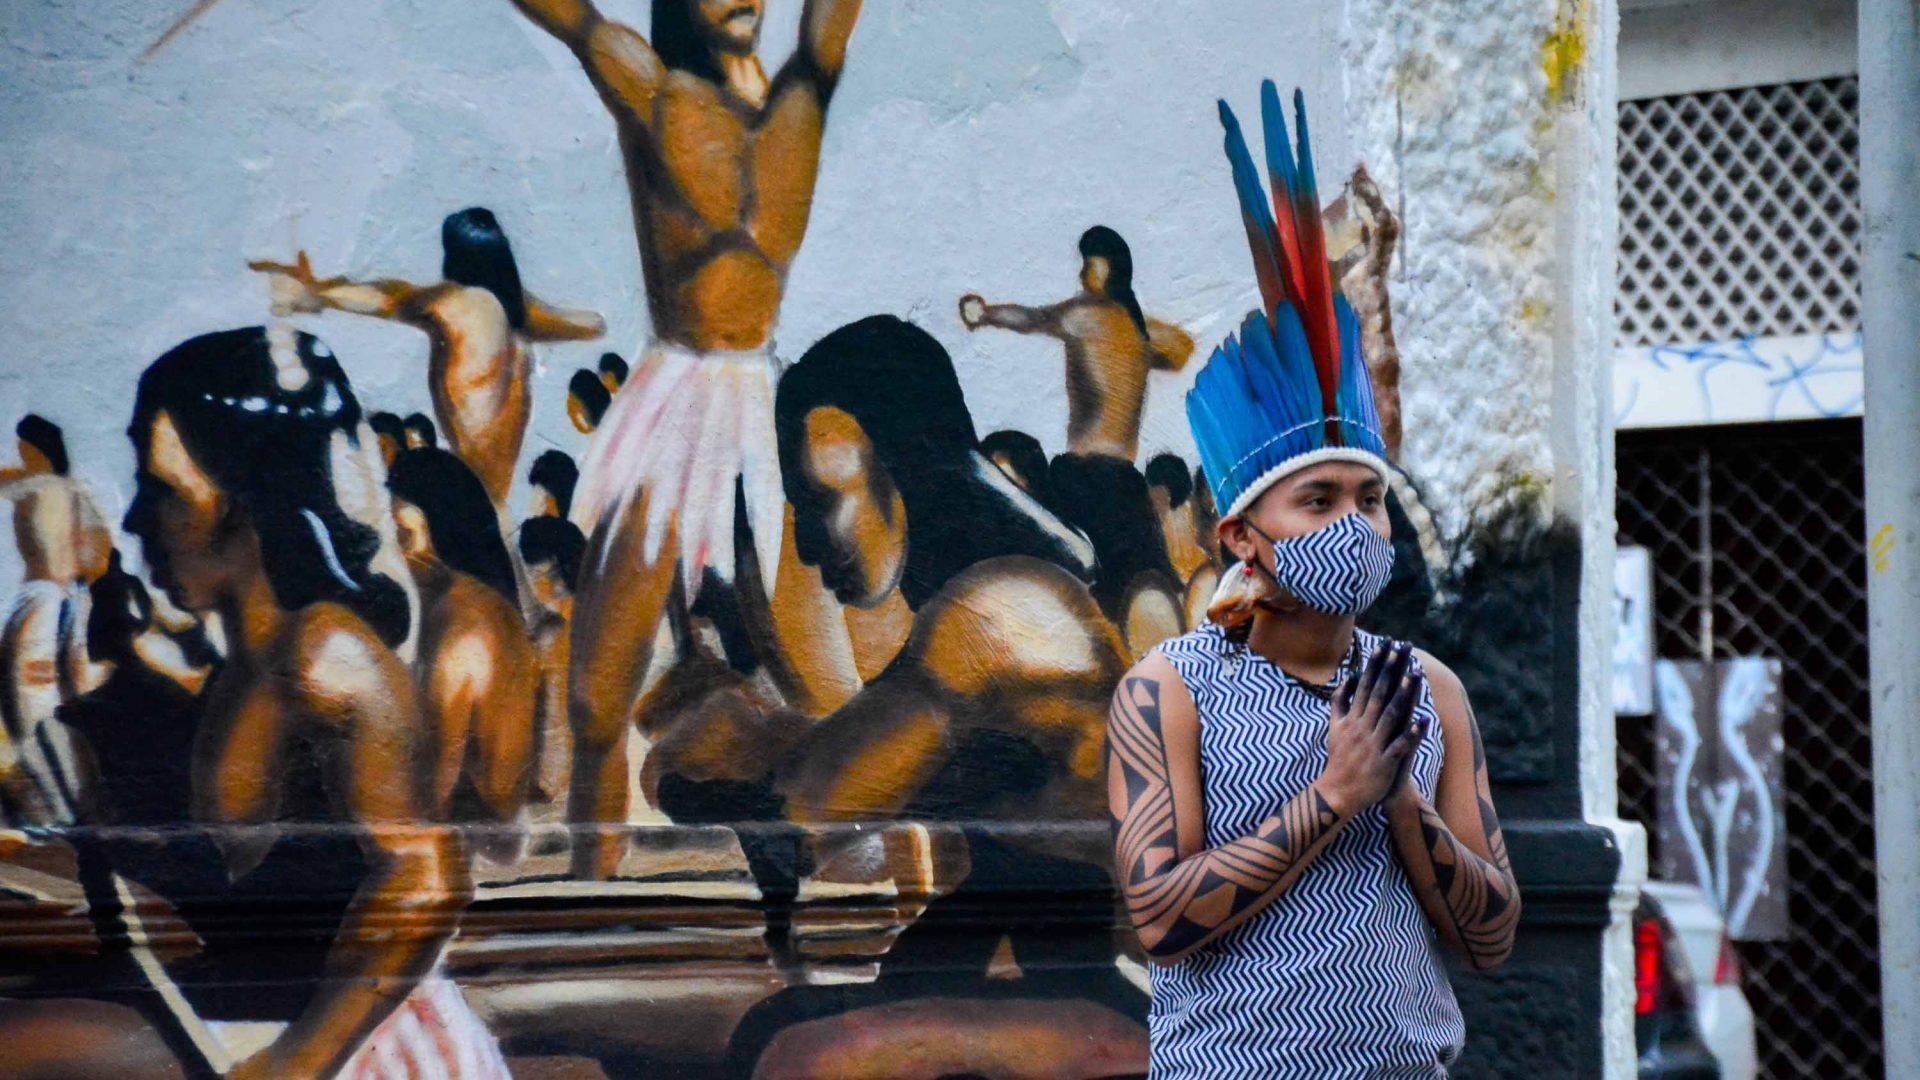 ‘Forgotten histories’: The Indigenous entrepreneurs telling their story in this Brazilian city